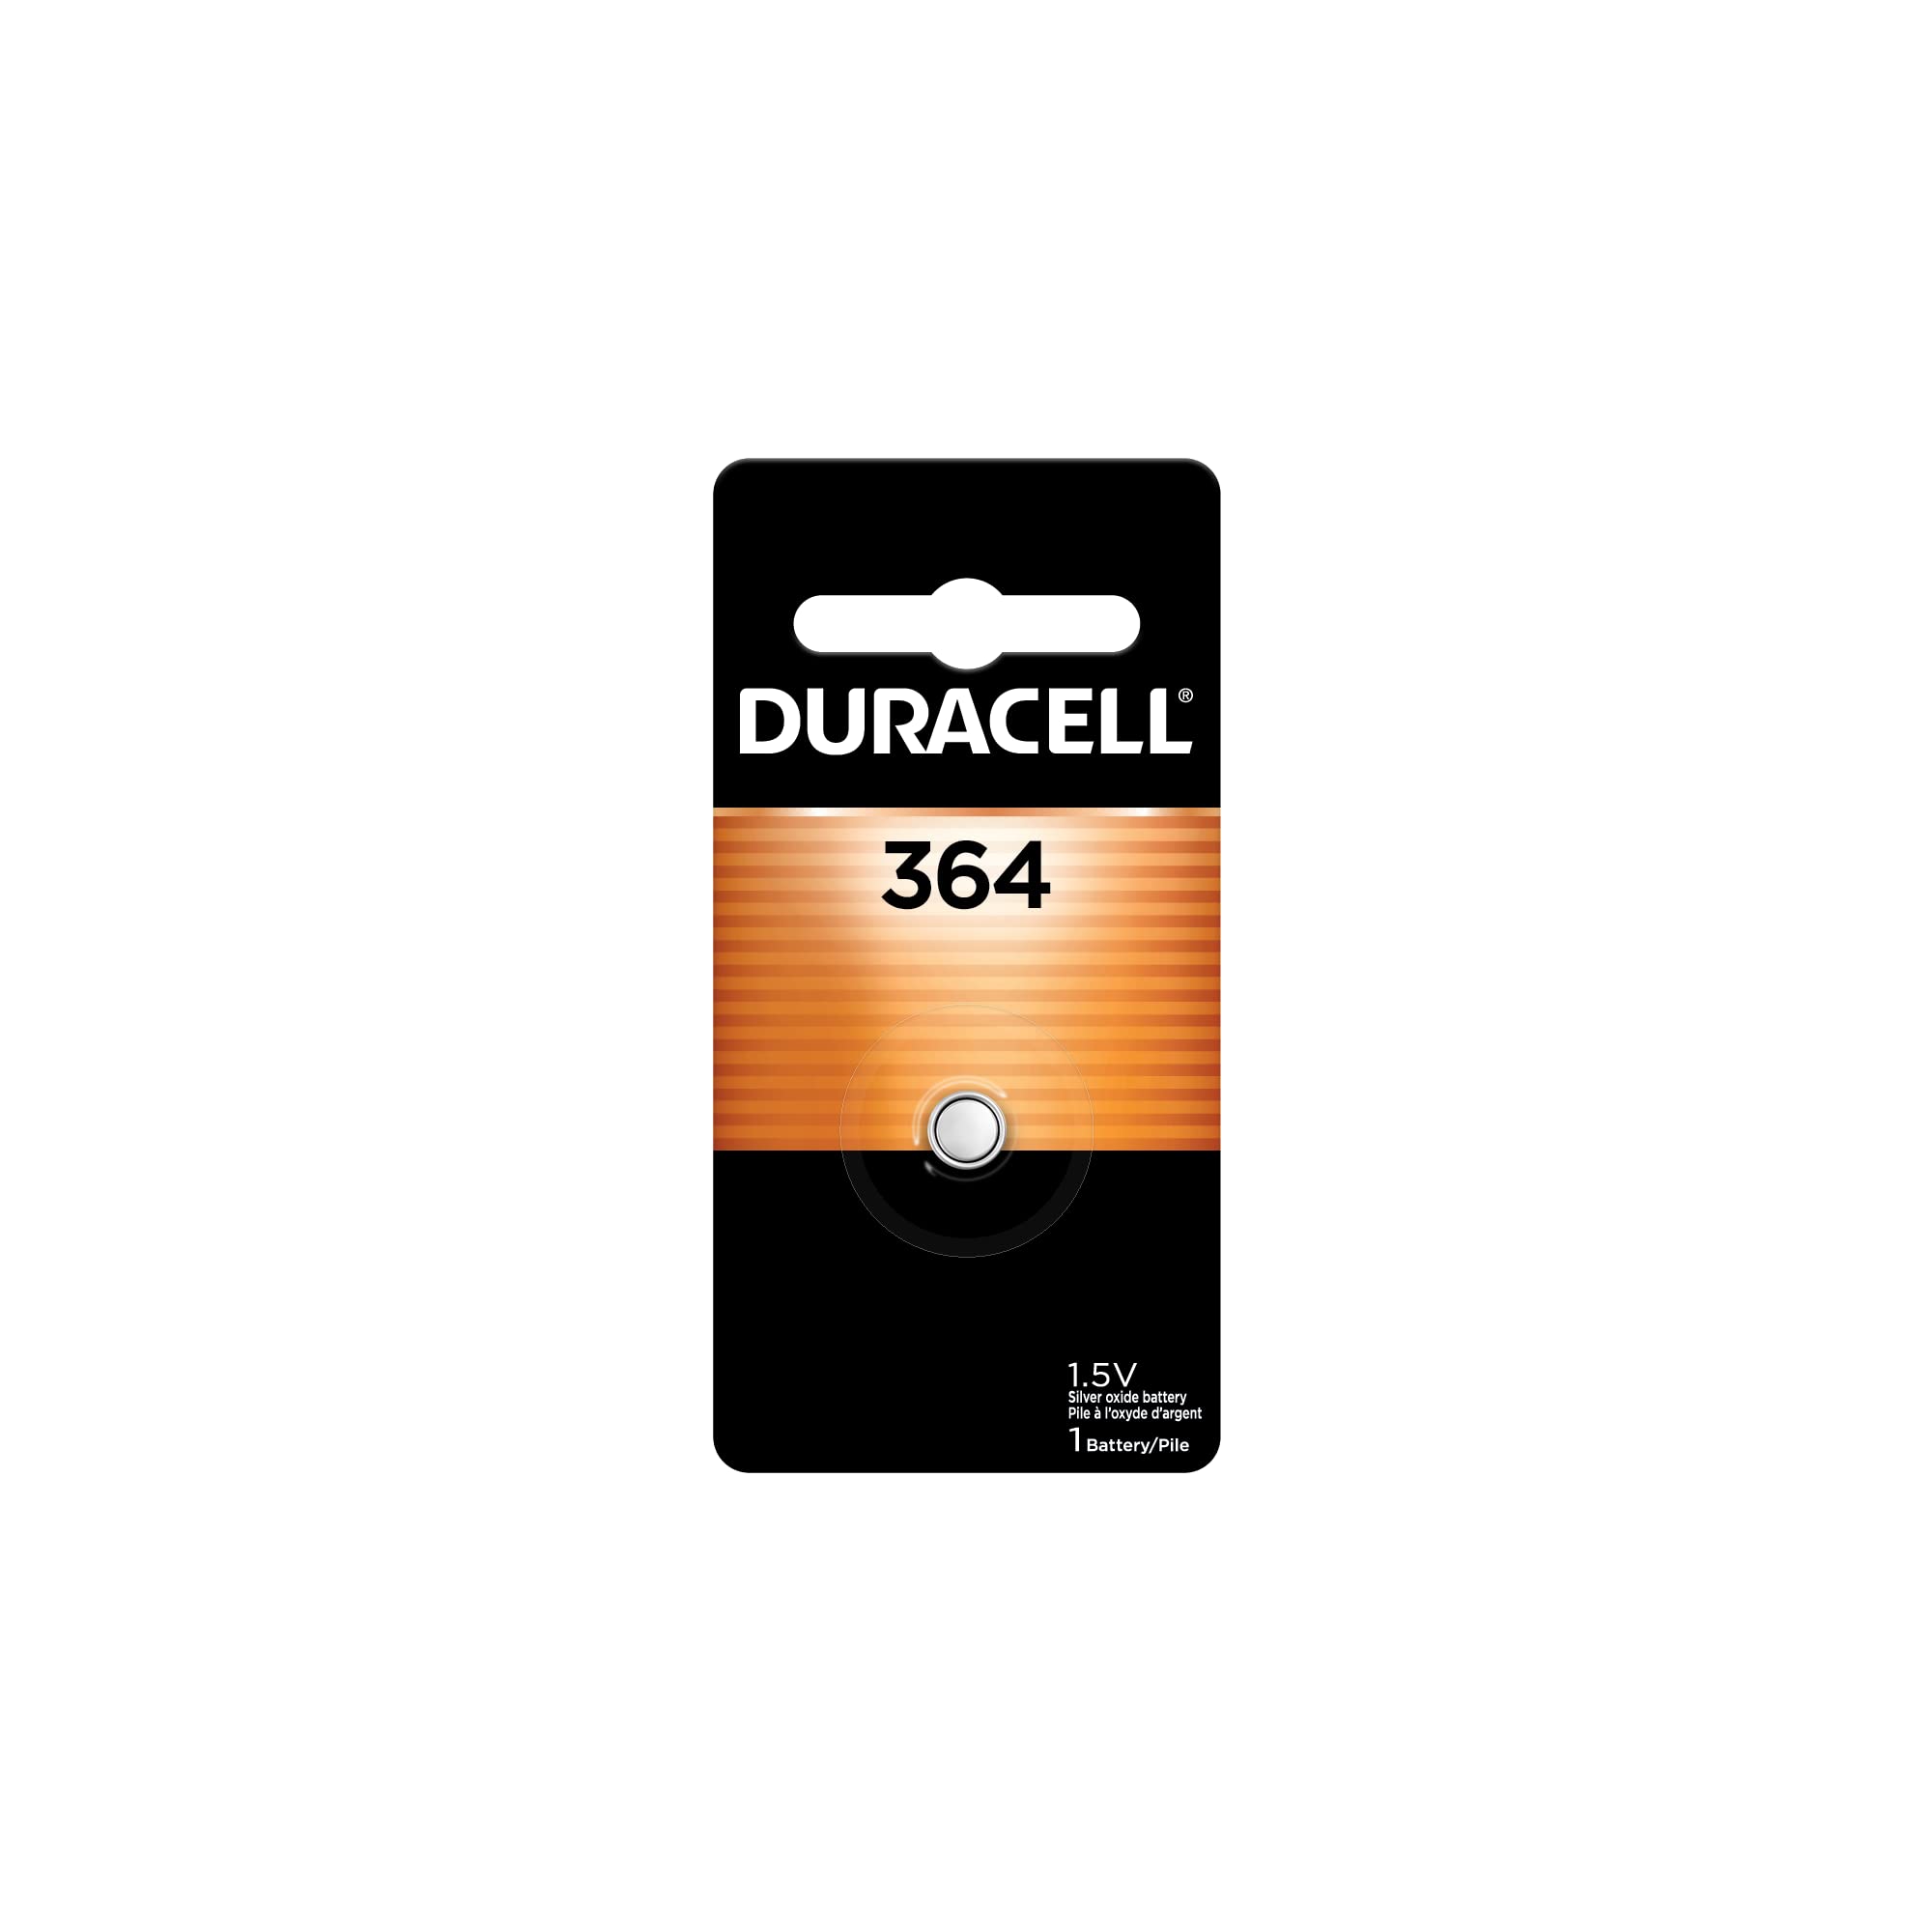 Duracell 364 Silver Oxide Button Battery, 1 Count Pack, 364 1.5 Volt Battery, Long-Lasting for Watches, Medical Devices, Calculators, and More